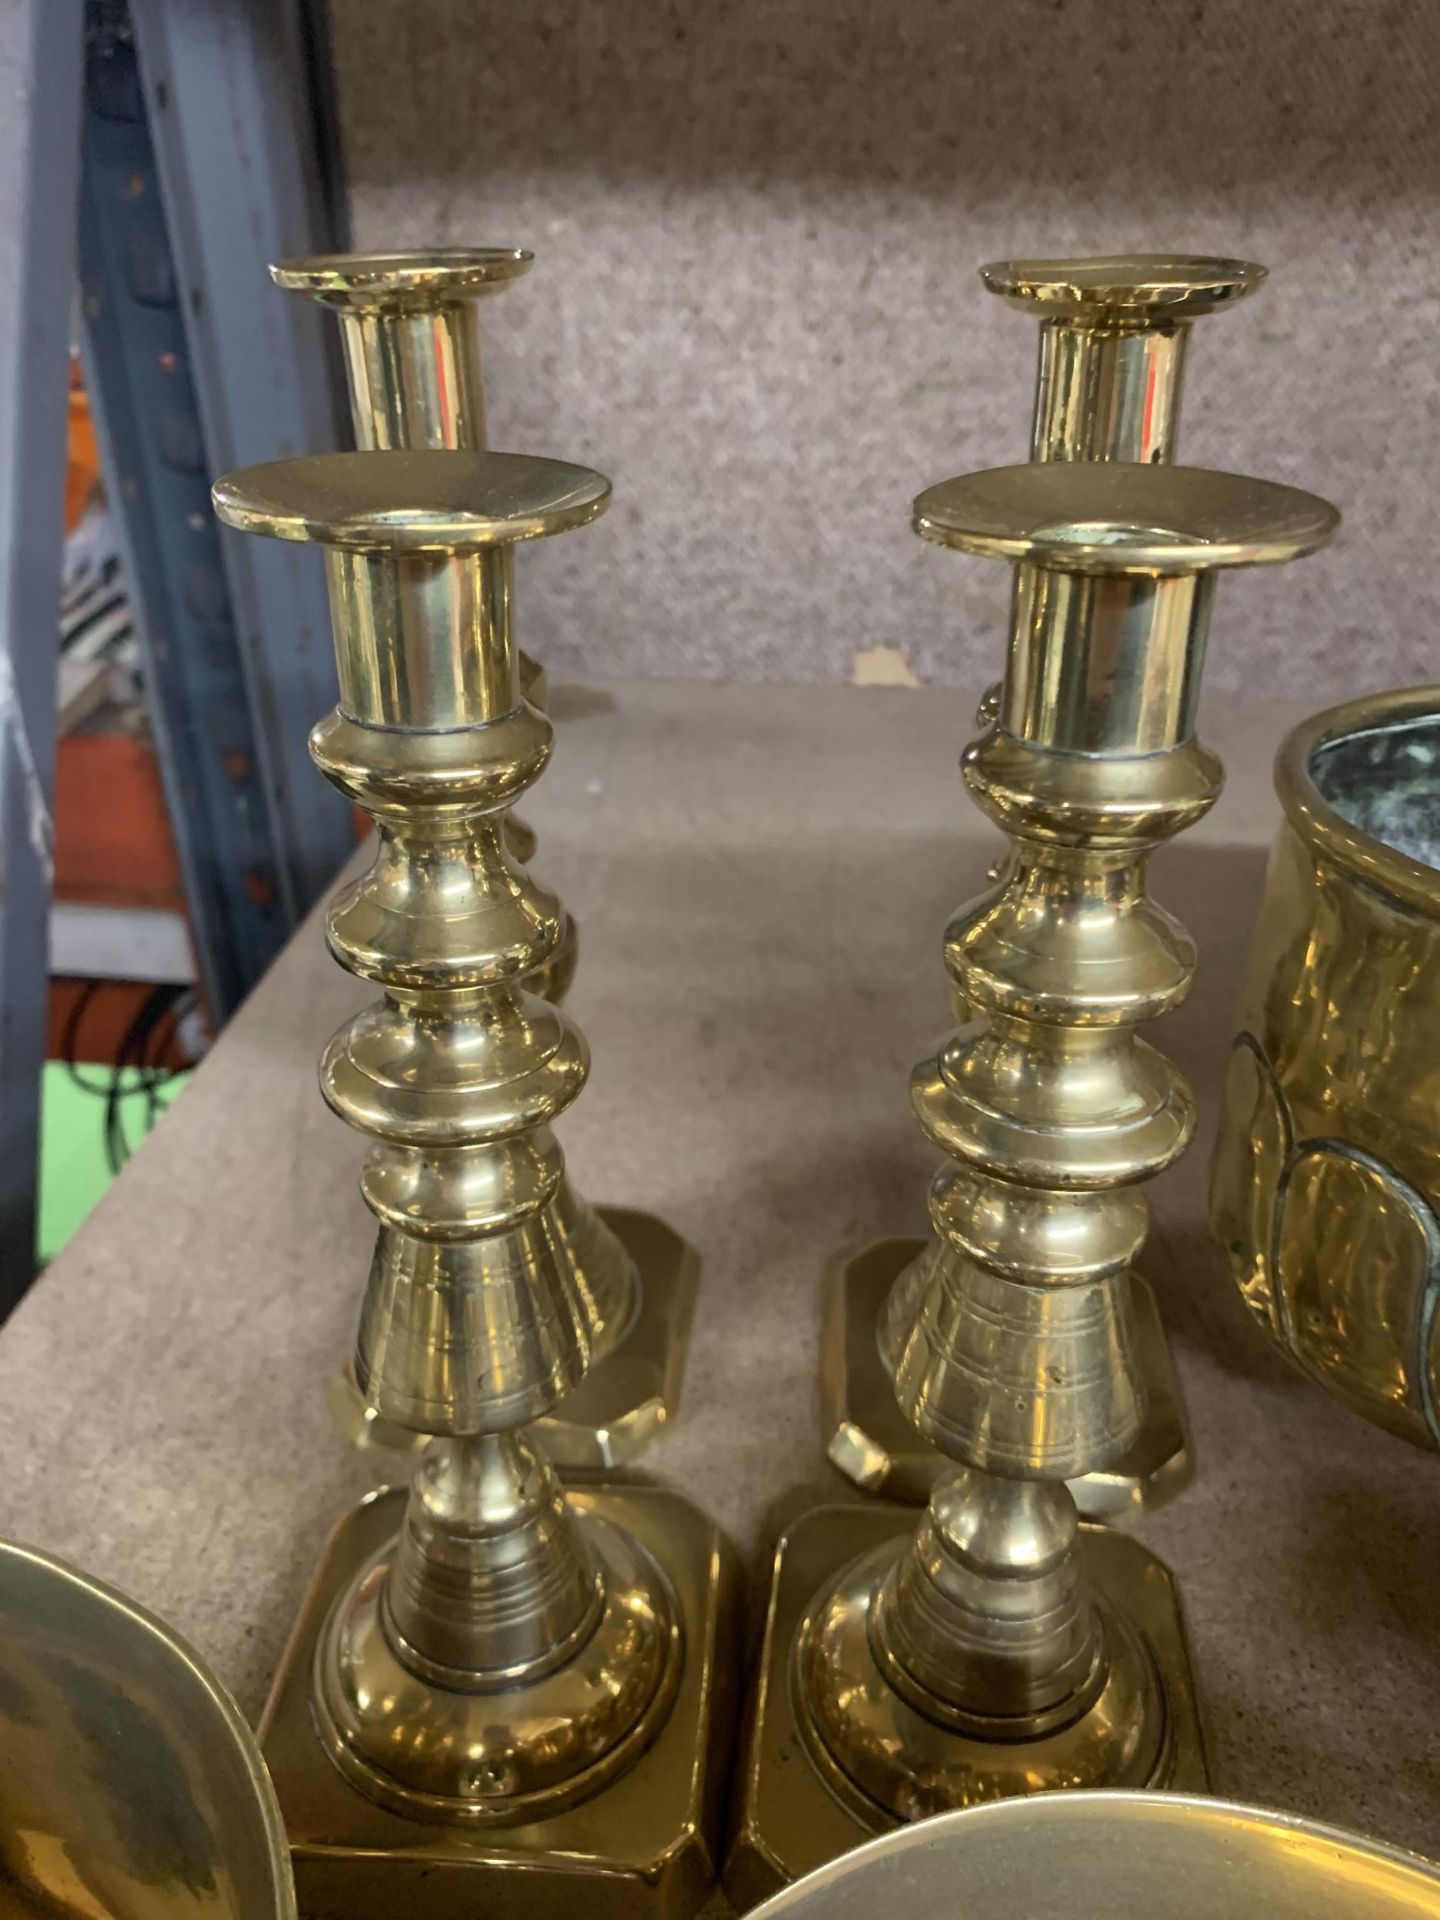 A LARGE QUANTITY OF BRASSWARE TO INCLUDE CANDLESTICKS, PLANTER, PANS, BELLS, ETC., - Image 5 of 5